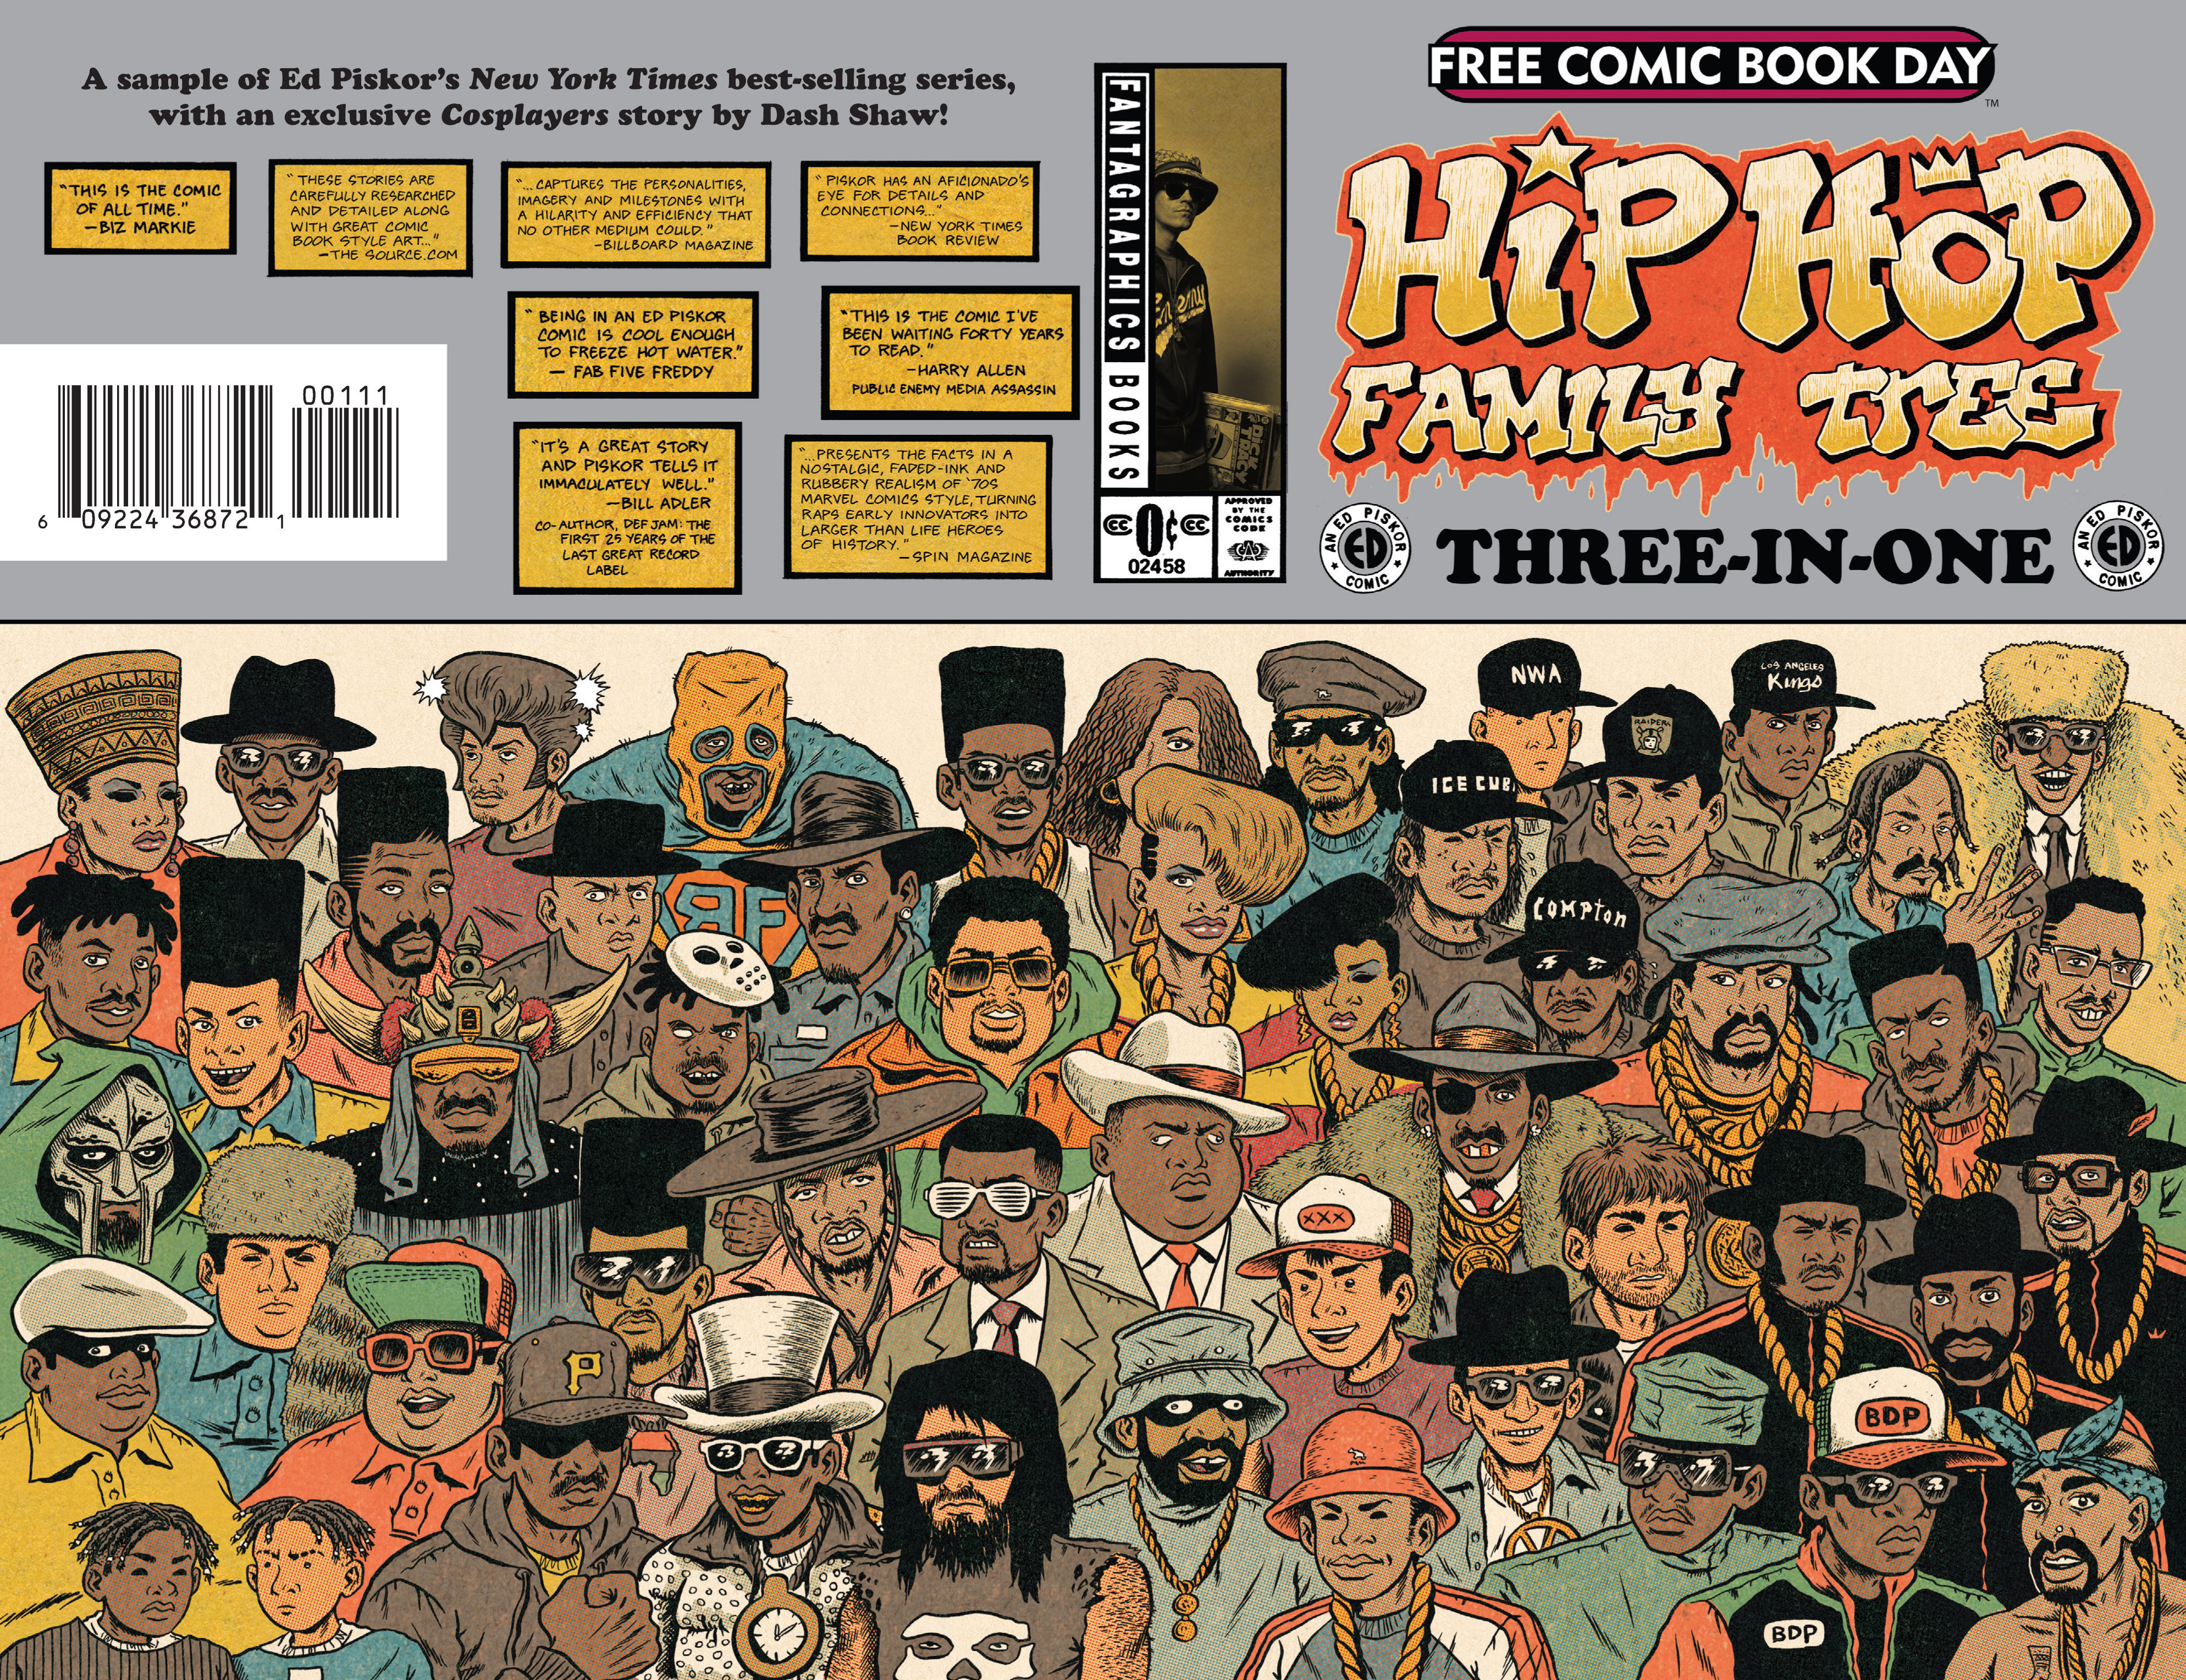 Read online Free Comic Book Day 2015 comic -  Issue # Hip Hop Family Tree Three-in-One - Featuring Cosplayers - 1